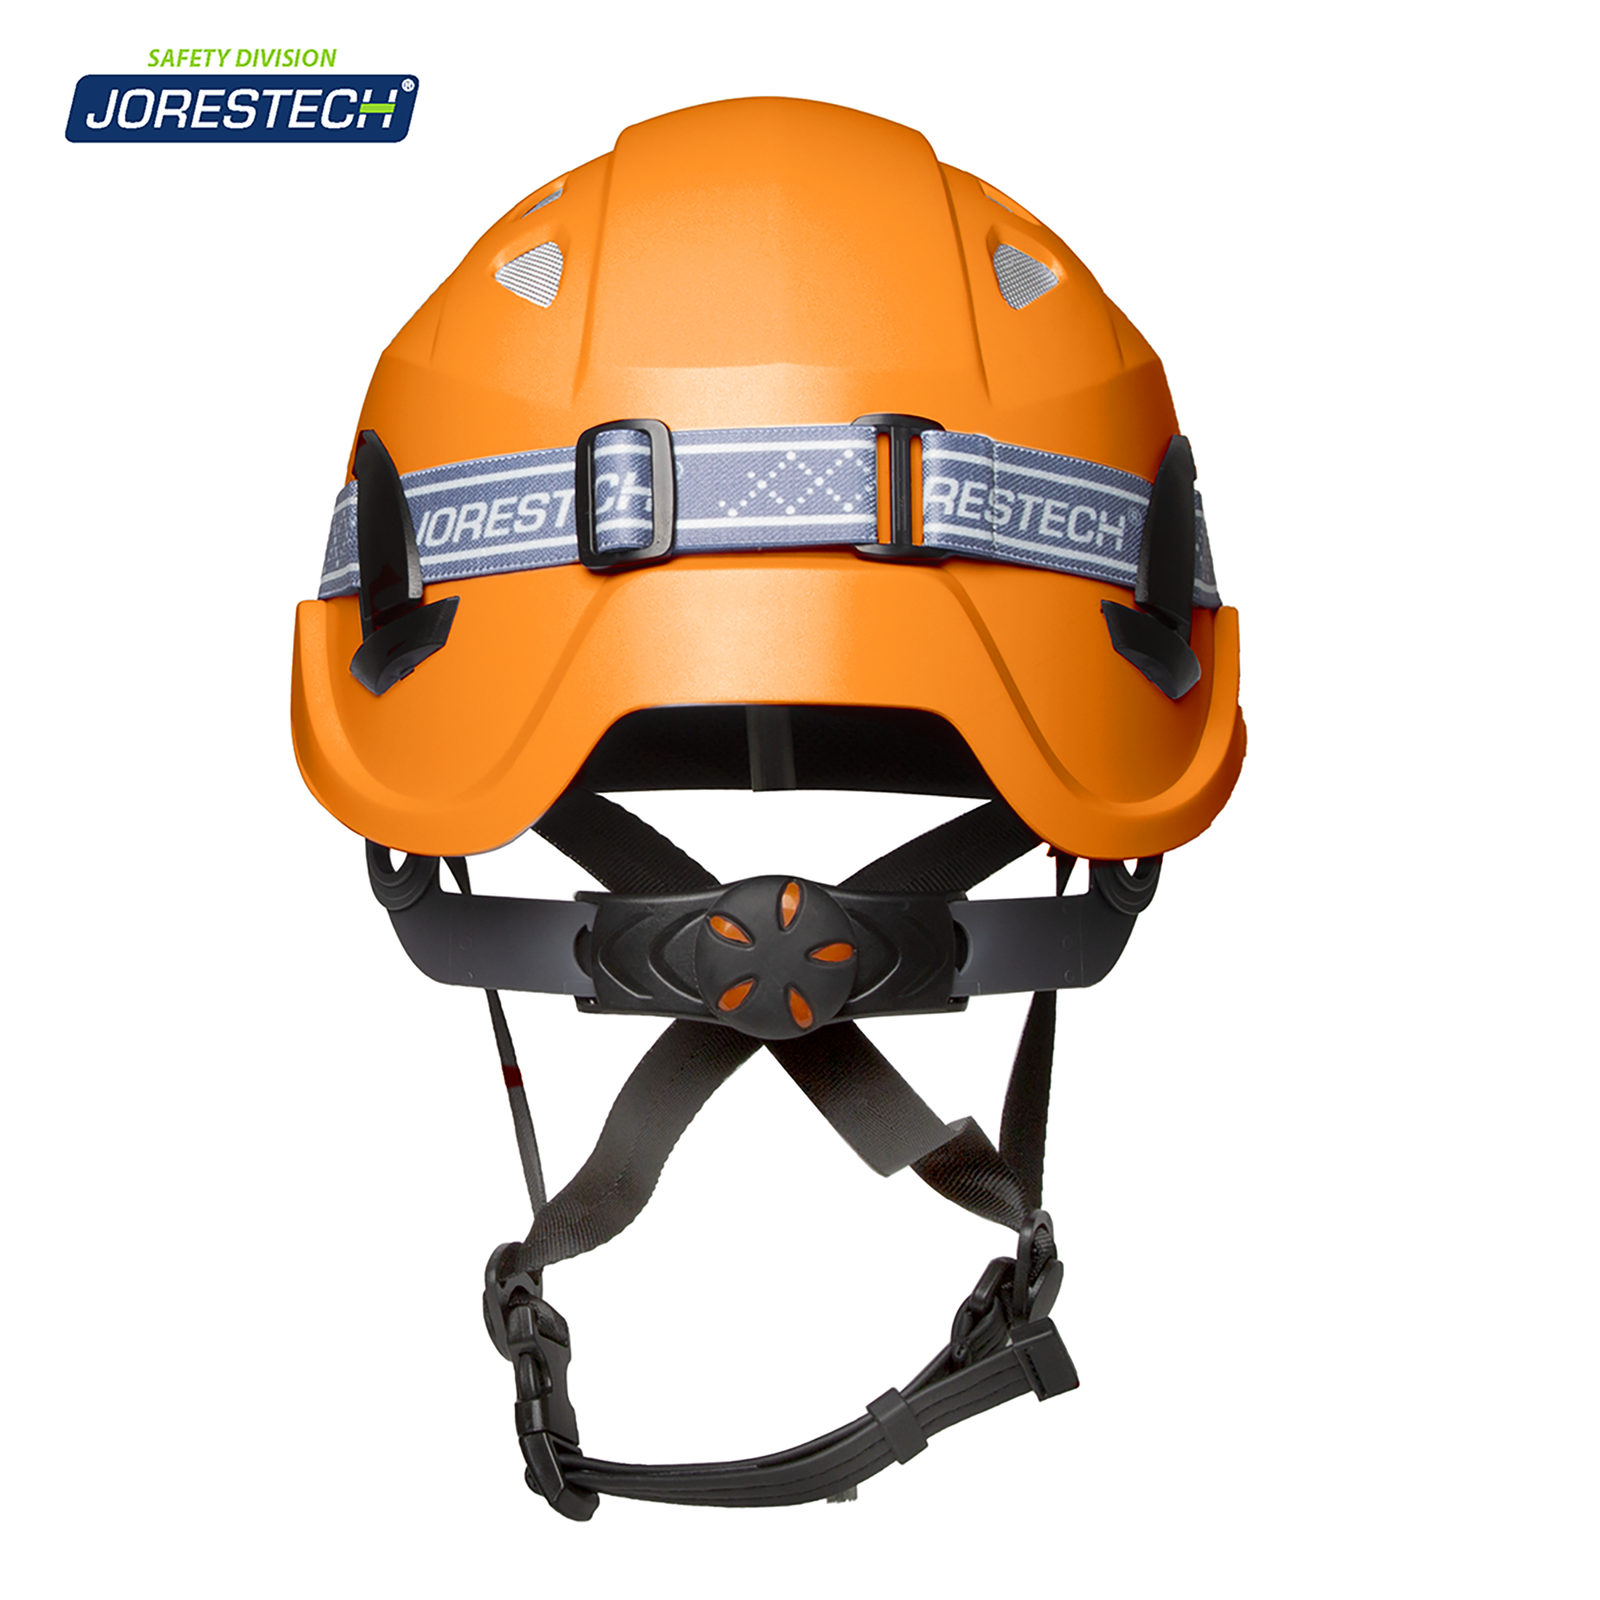 Back view of an orange JORESTECH ANSI compliant hart hat with ventilation showing the adjustable strap of a head lamp.